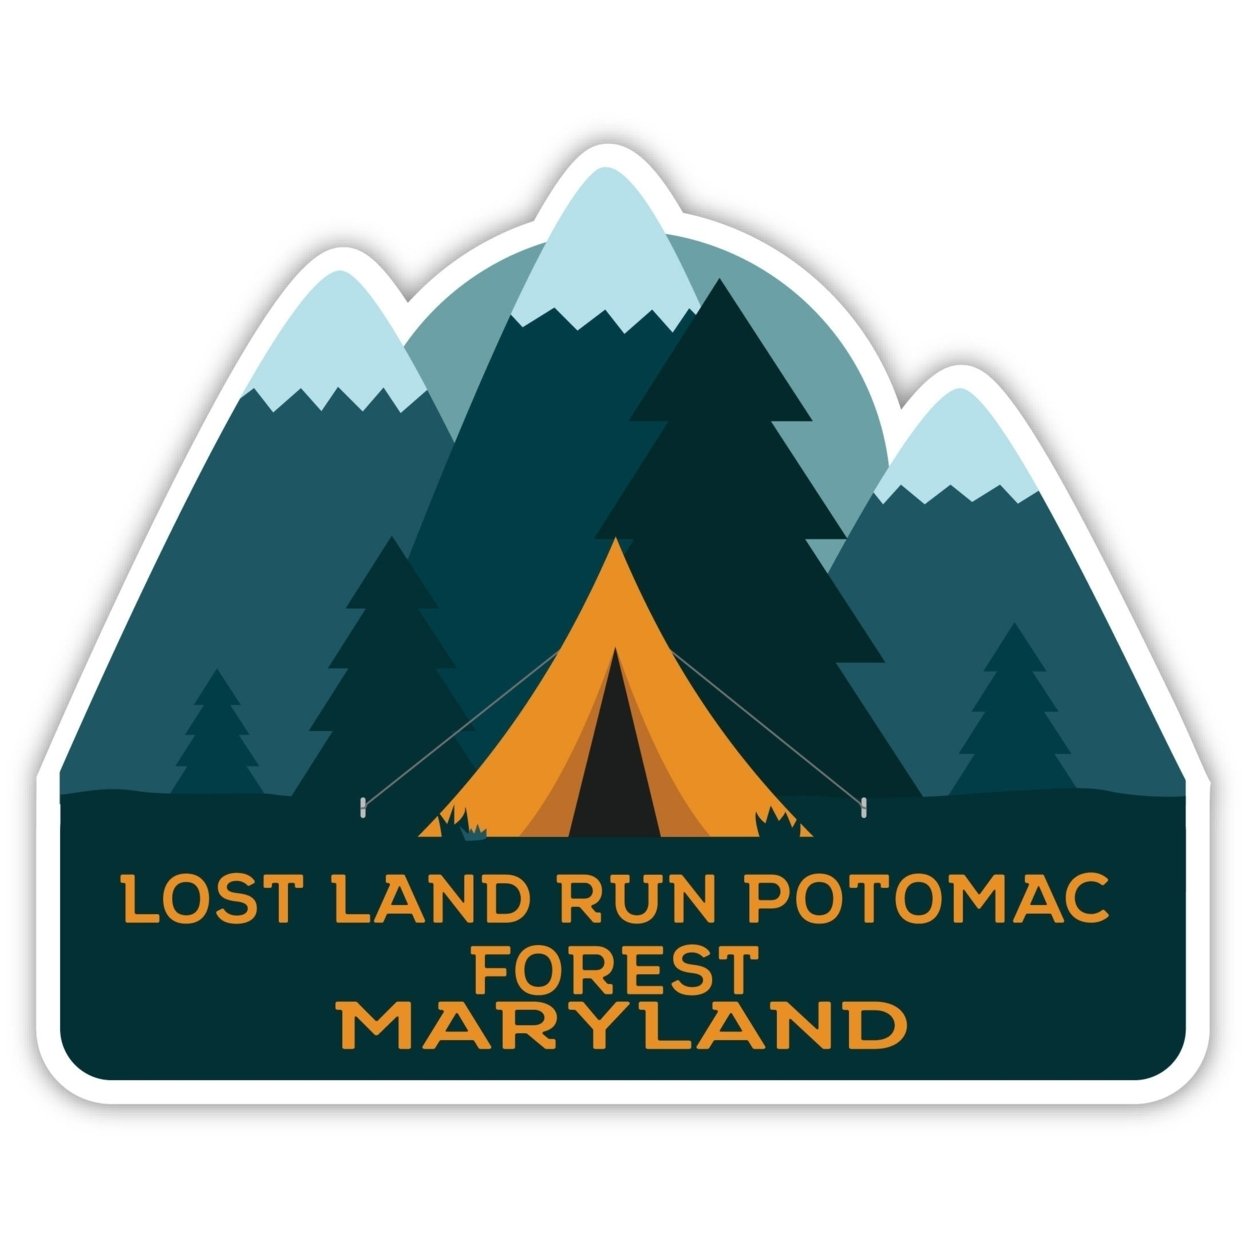 Lost Land Run Potomac Forest Maryland Souvenir Decorative Stickers (Choose Theme And Size) - 2-Inch, Tent